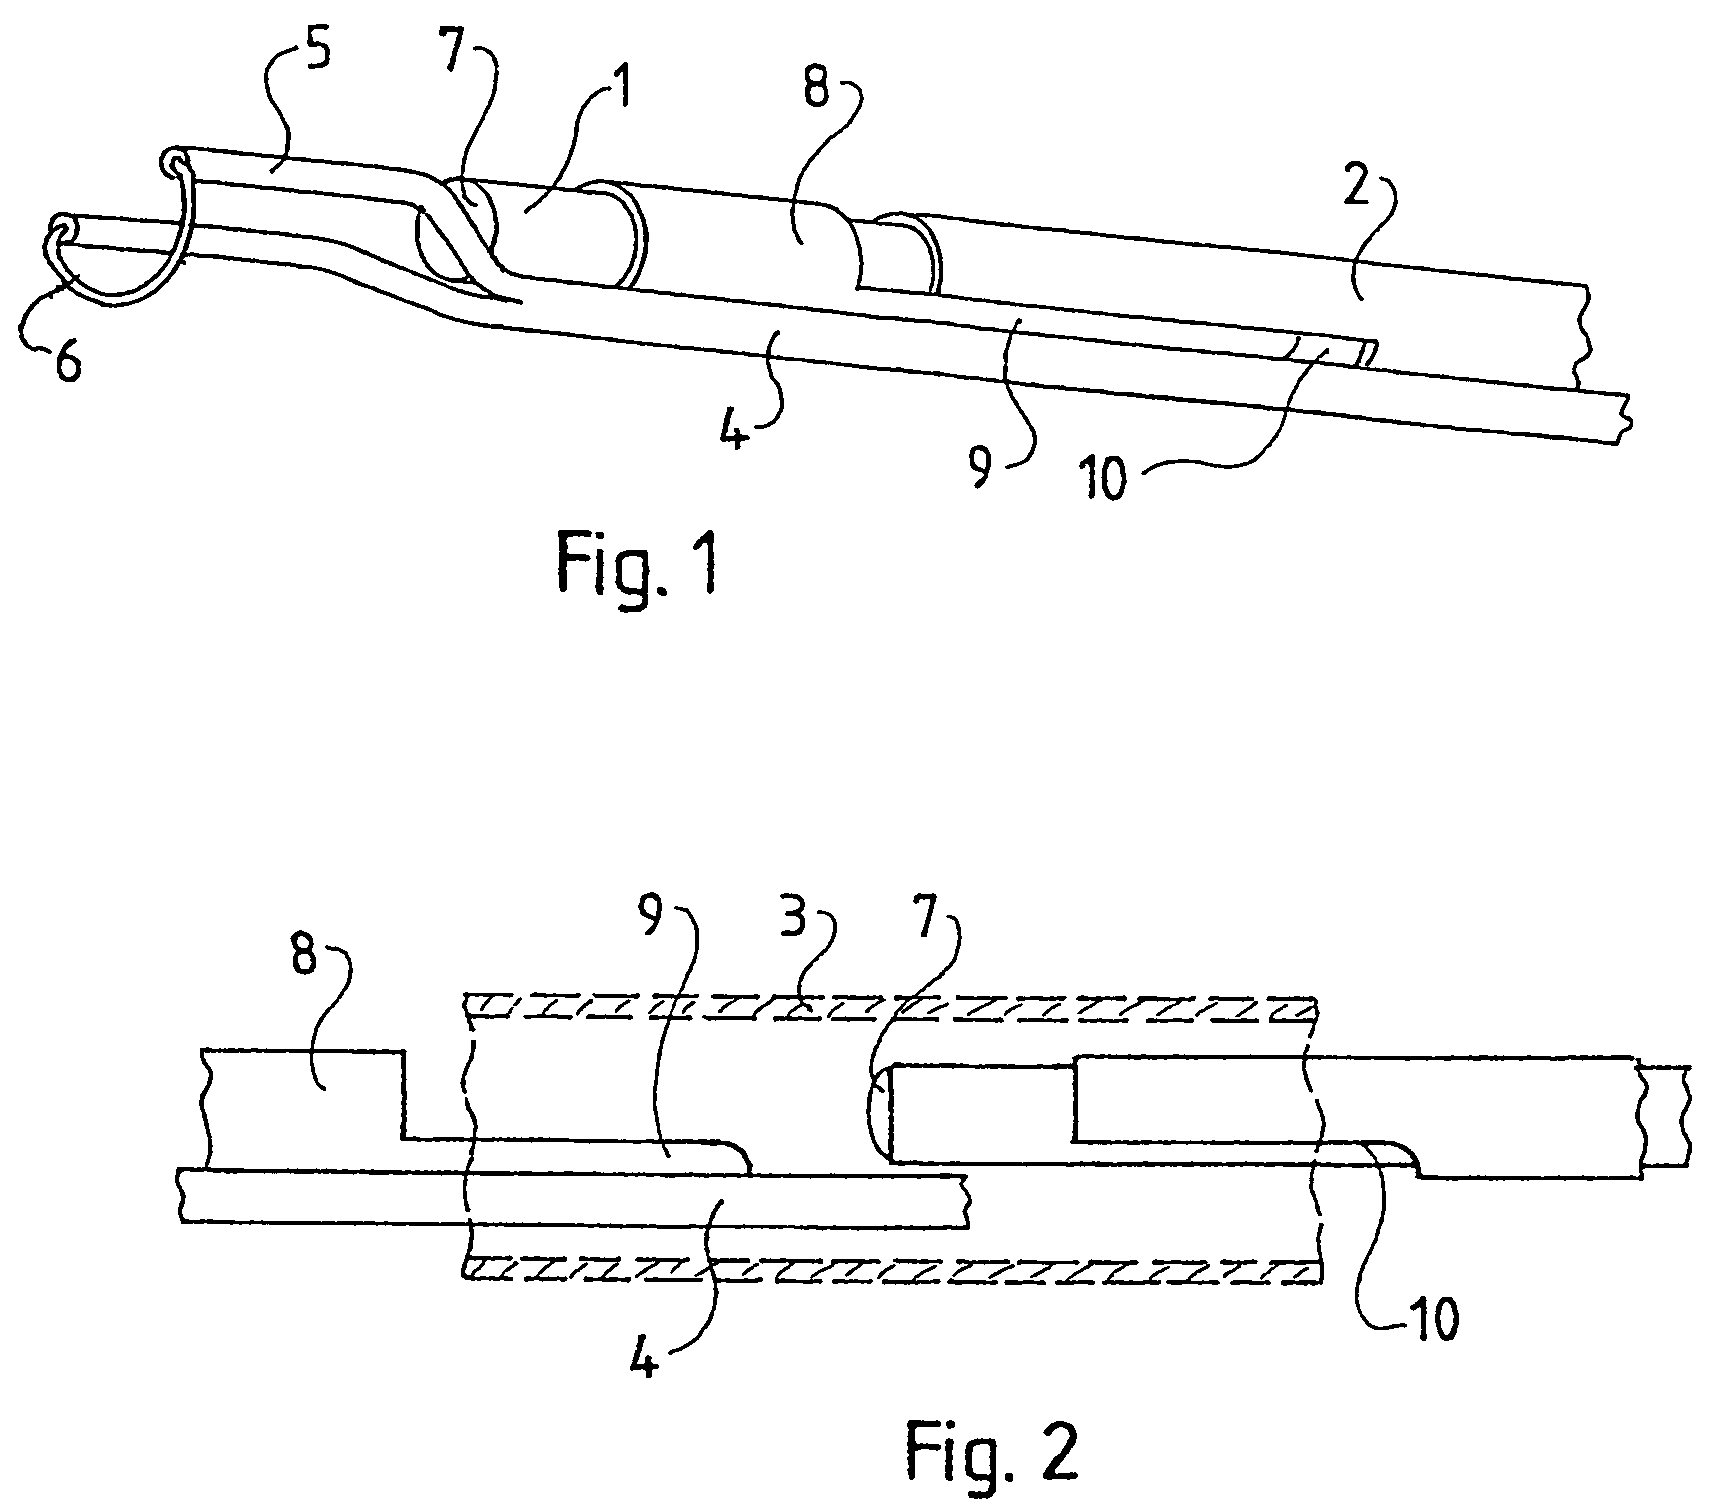 Urological resectoscope having a non-rotating instrument support